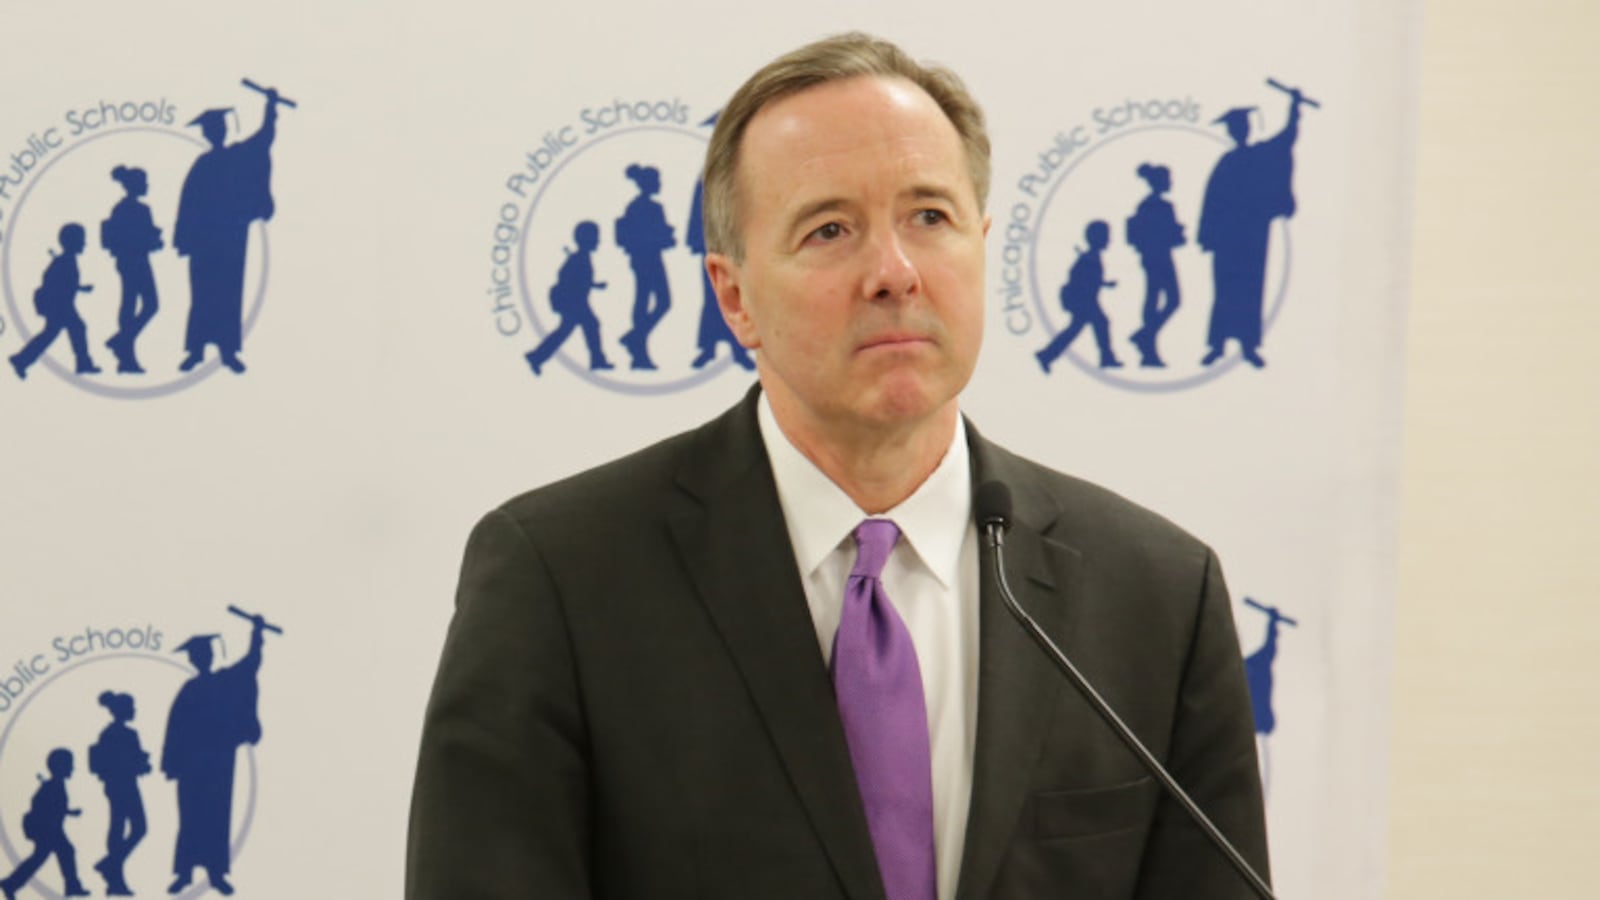 Former Chicago schools CEO Forrest Claypool made at least $246,154 from the district in 2017.